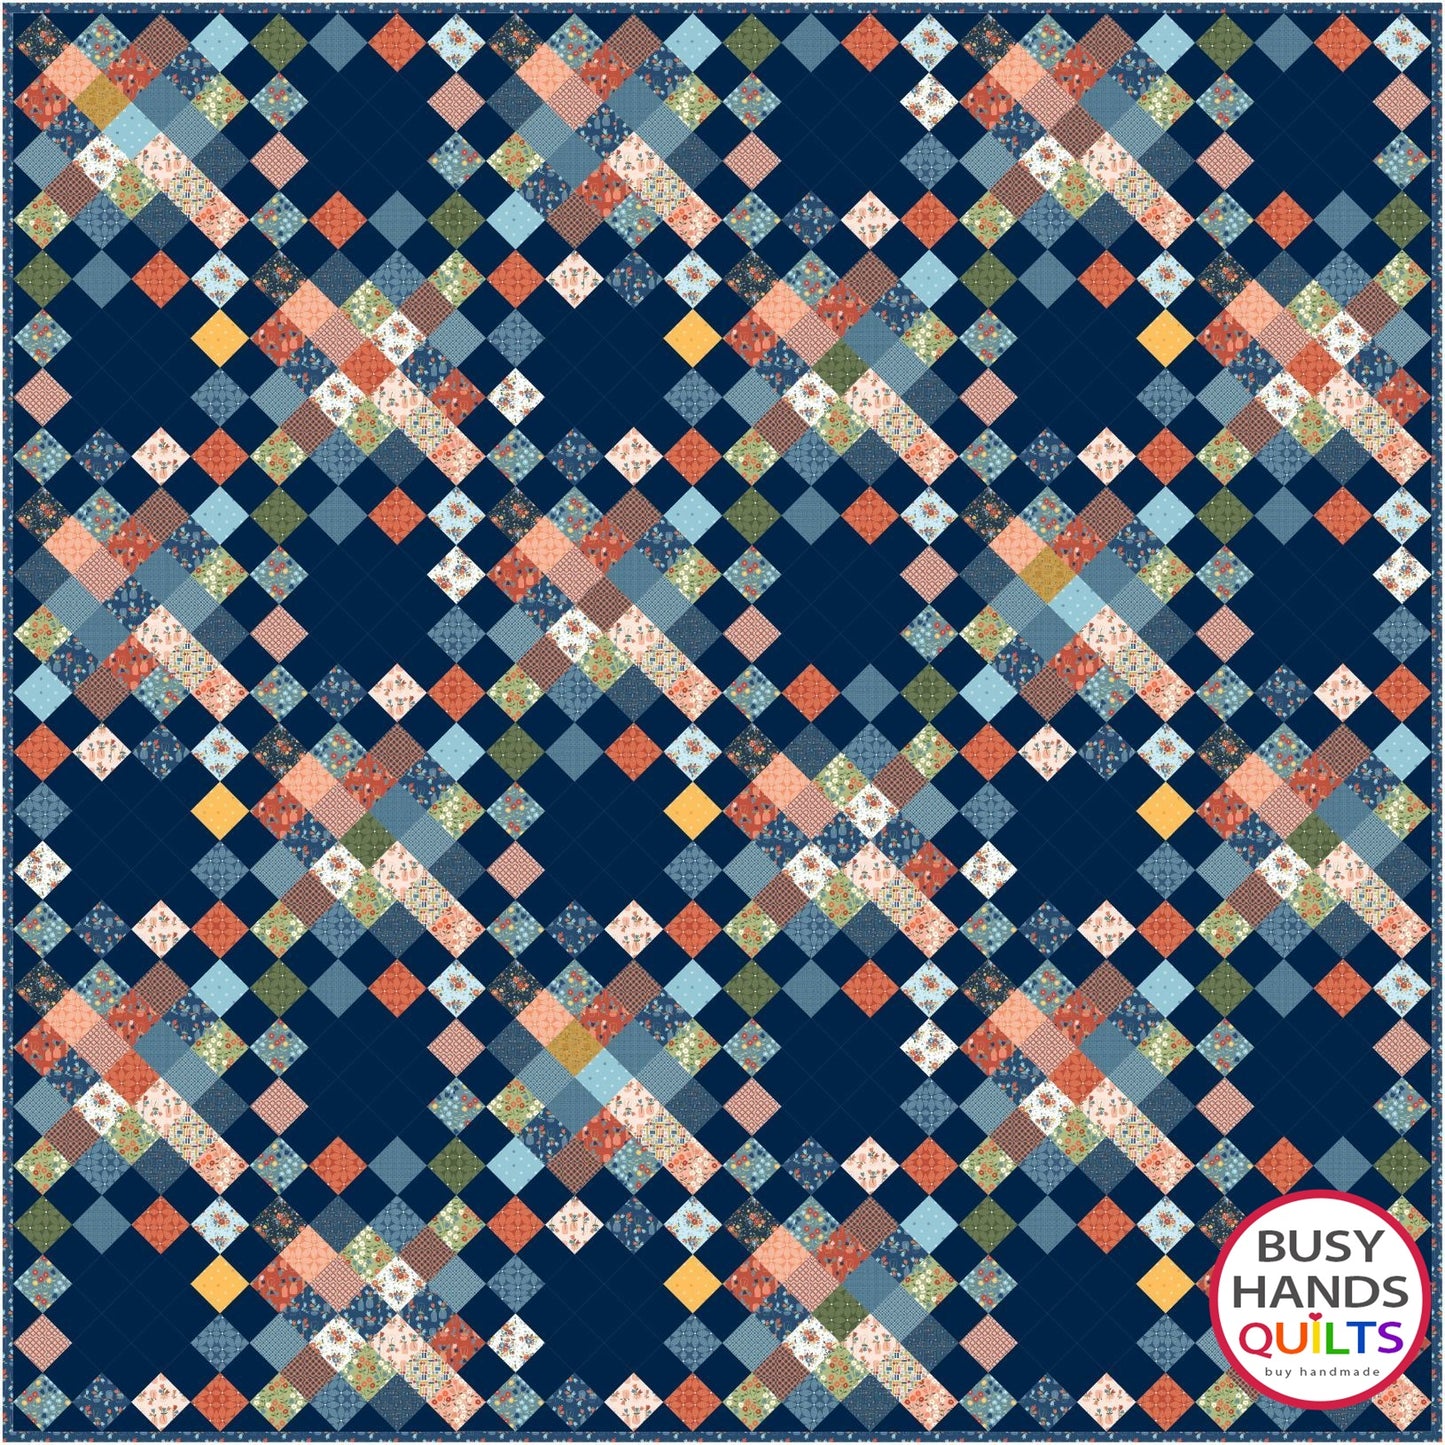 Picnic Plaid Quilt Kit in Forget Me Not with NAVY Background